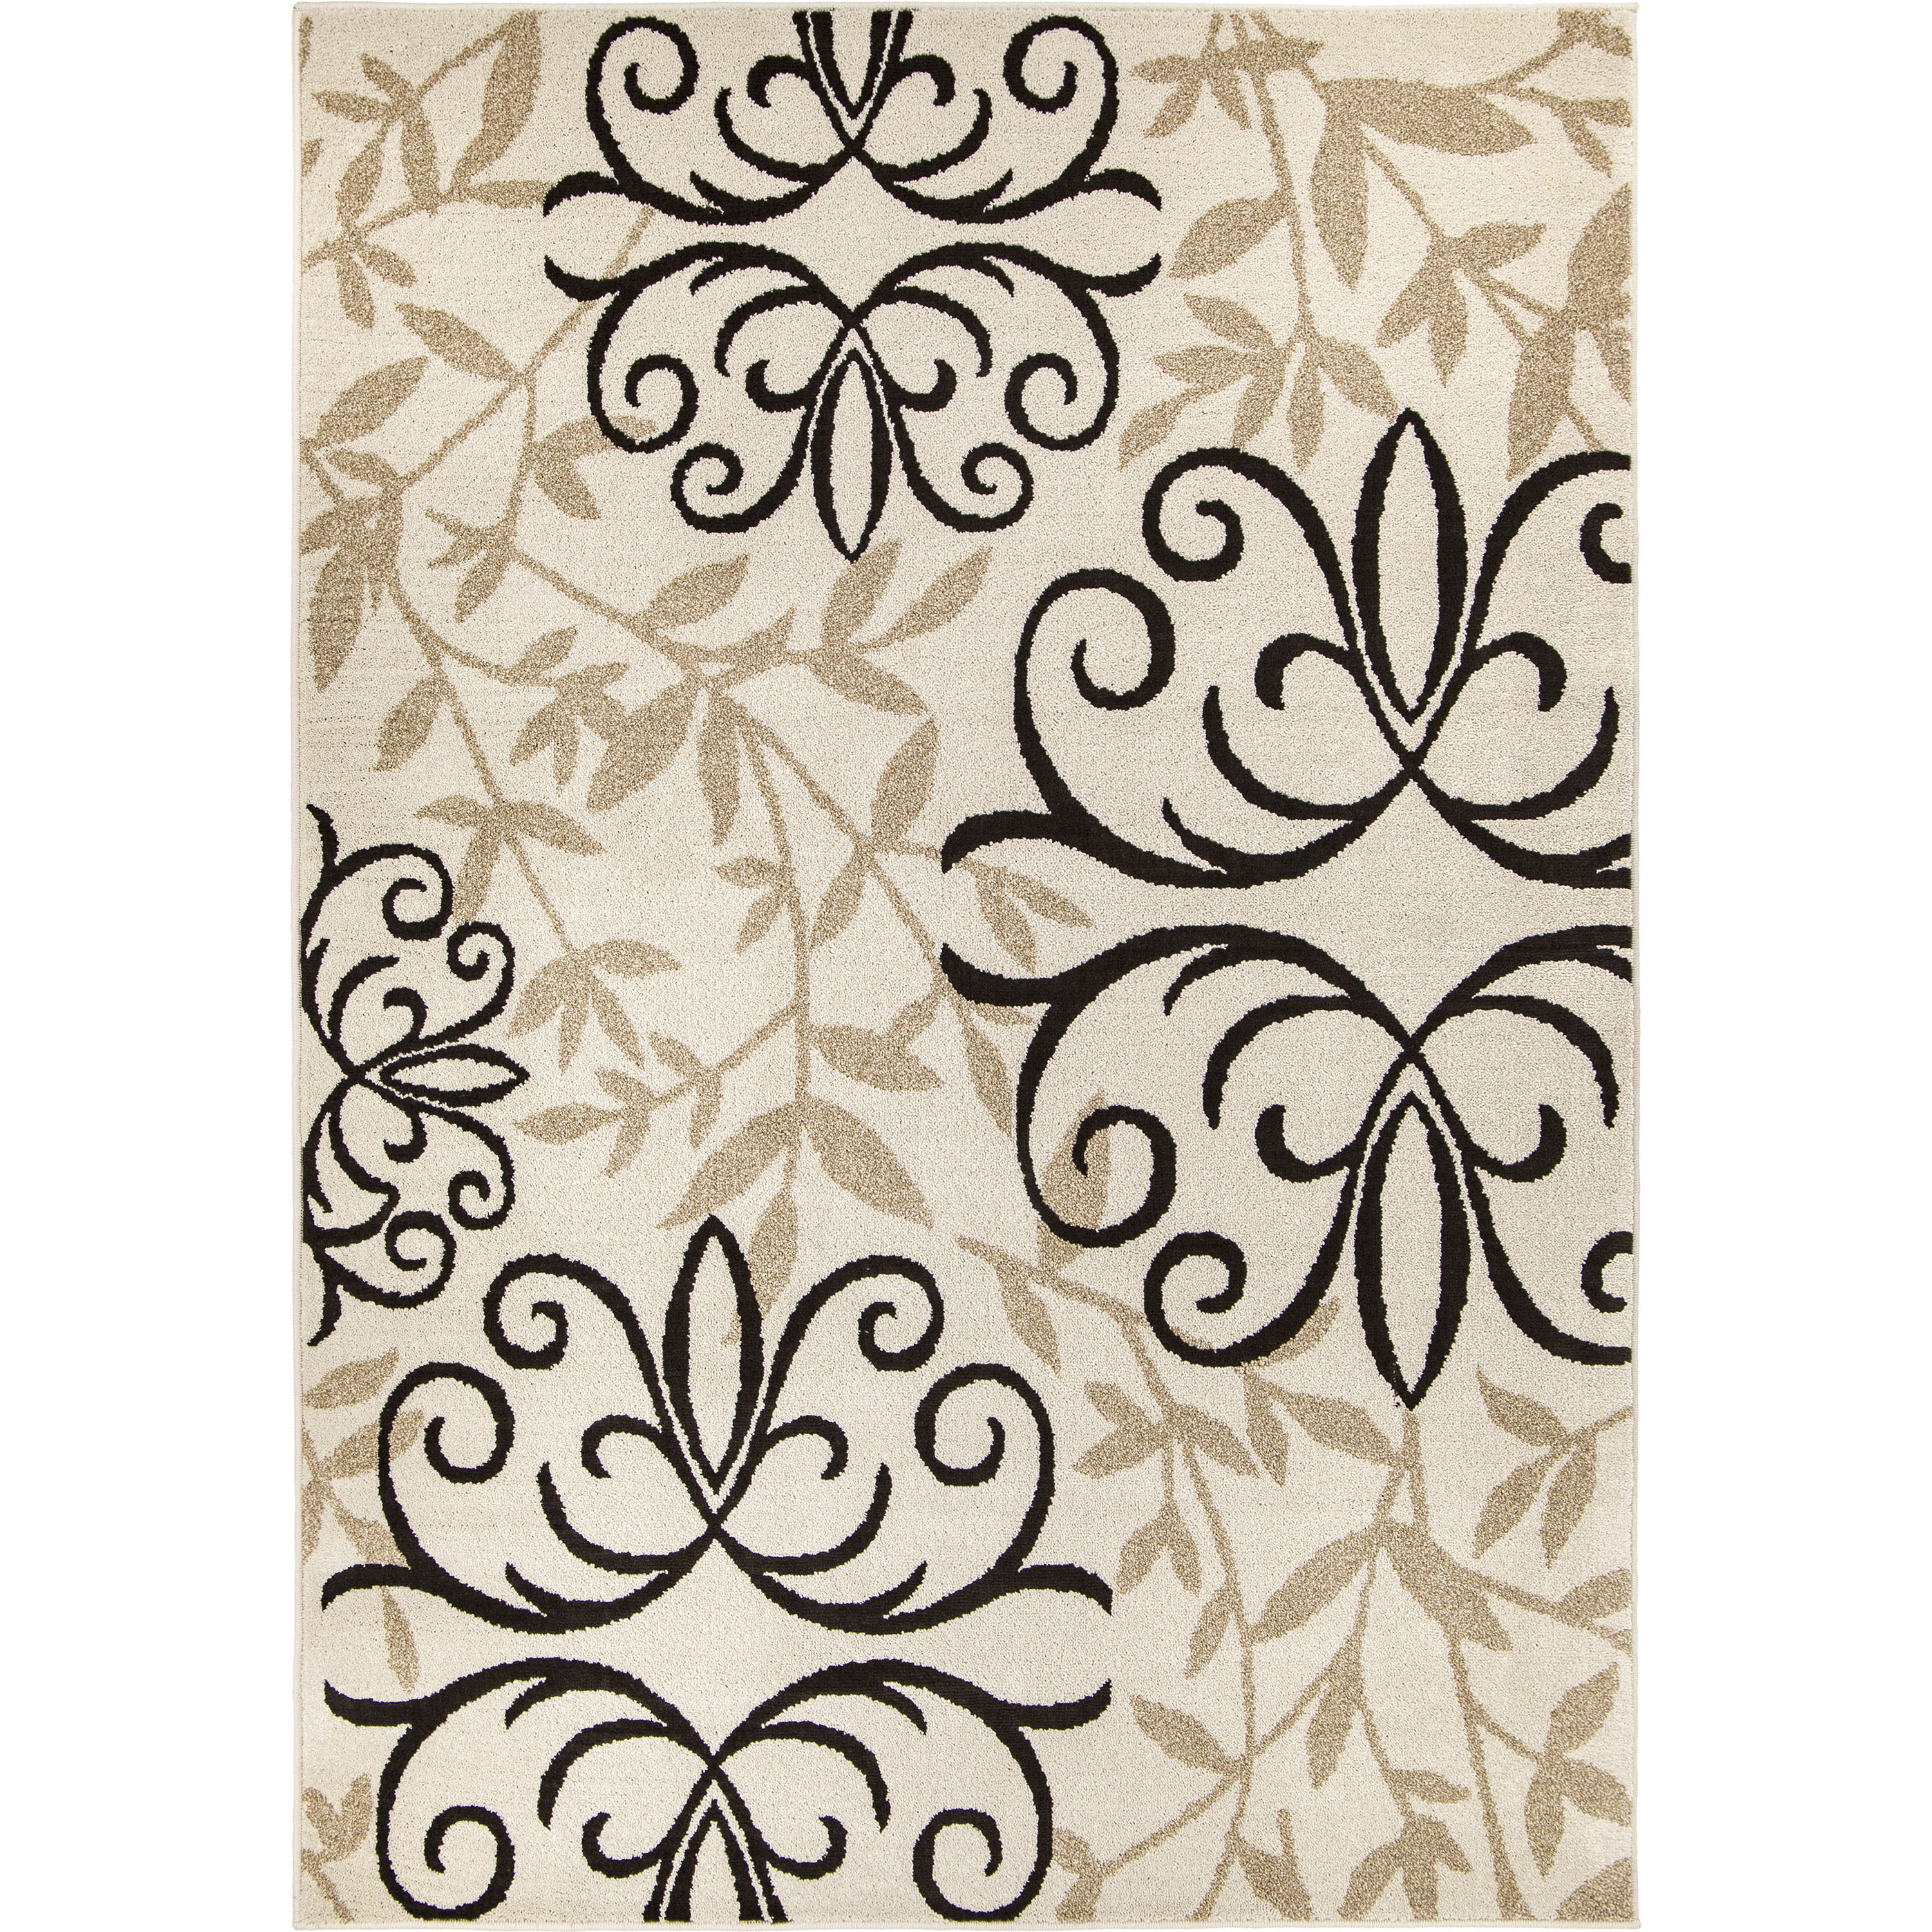 Better Homes & Gardens Iron Fleur Area Rug, Off-White, 7'10" x 10'10" - image 5 of 8